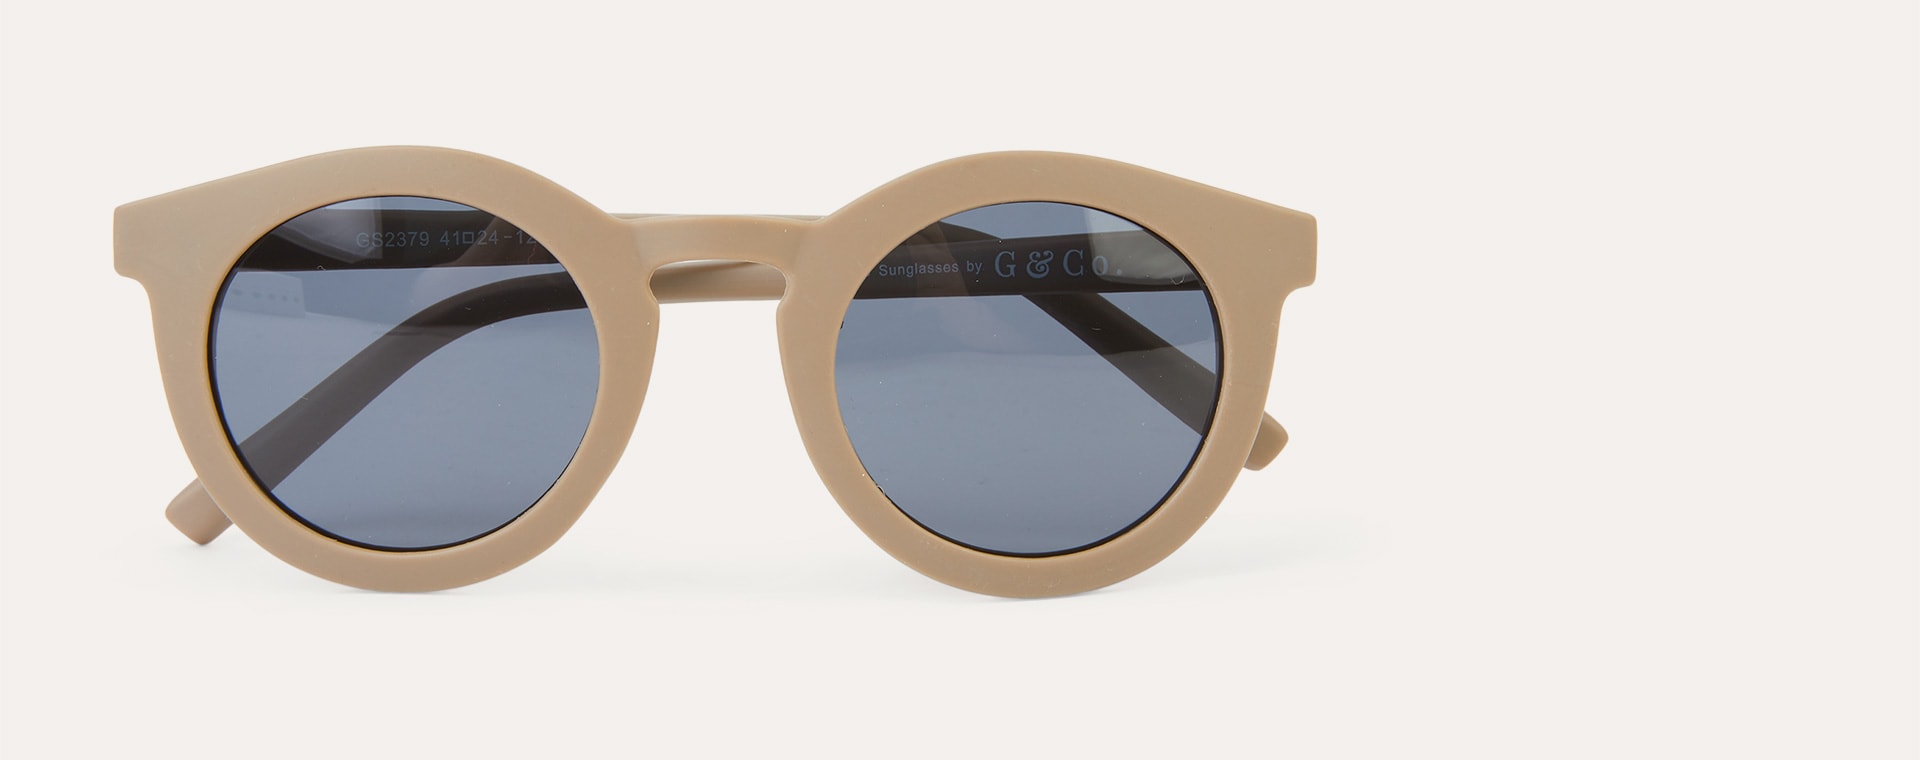 Stone Grech & Co New Sustainable Sunglasses